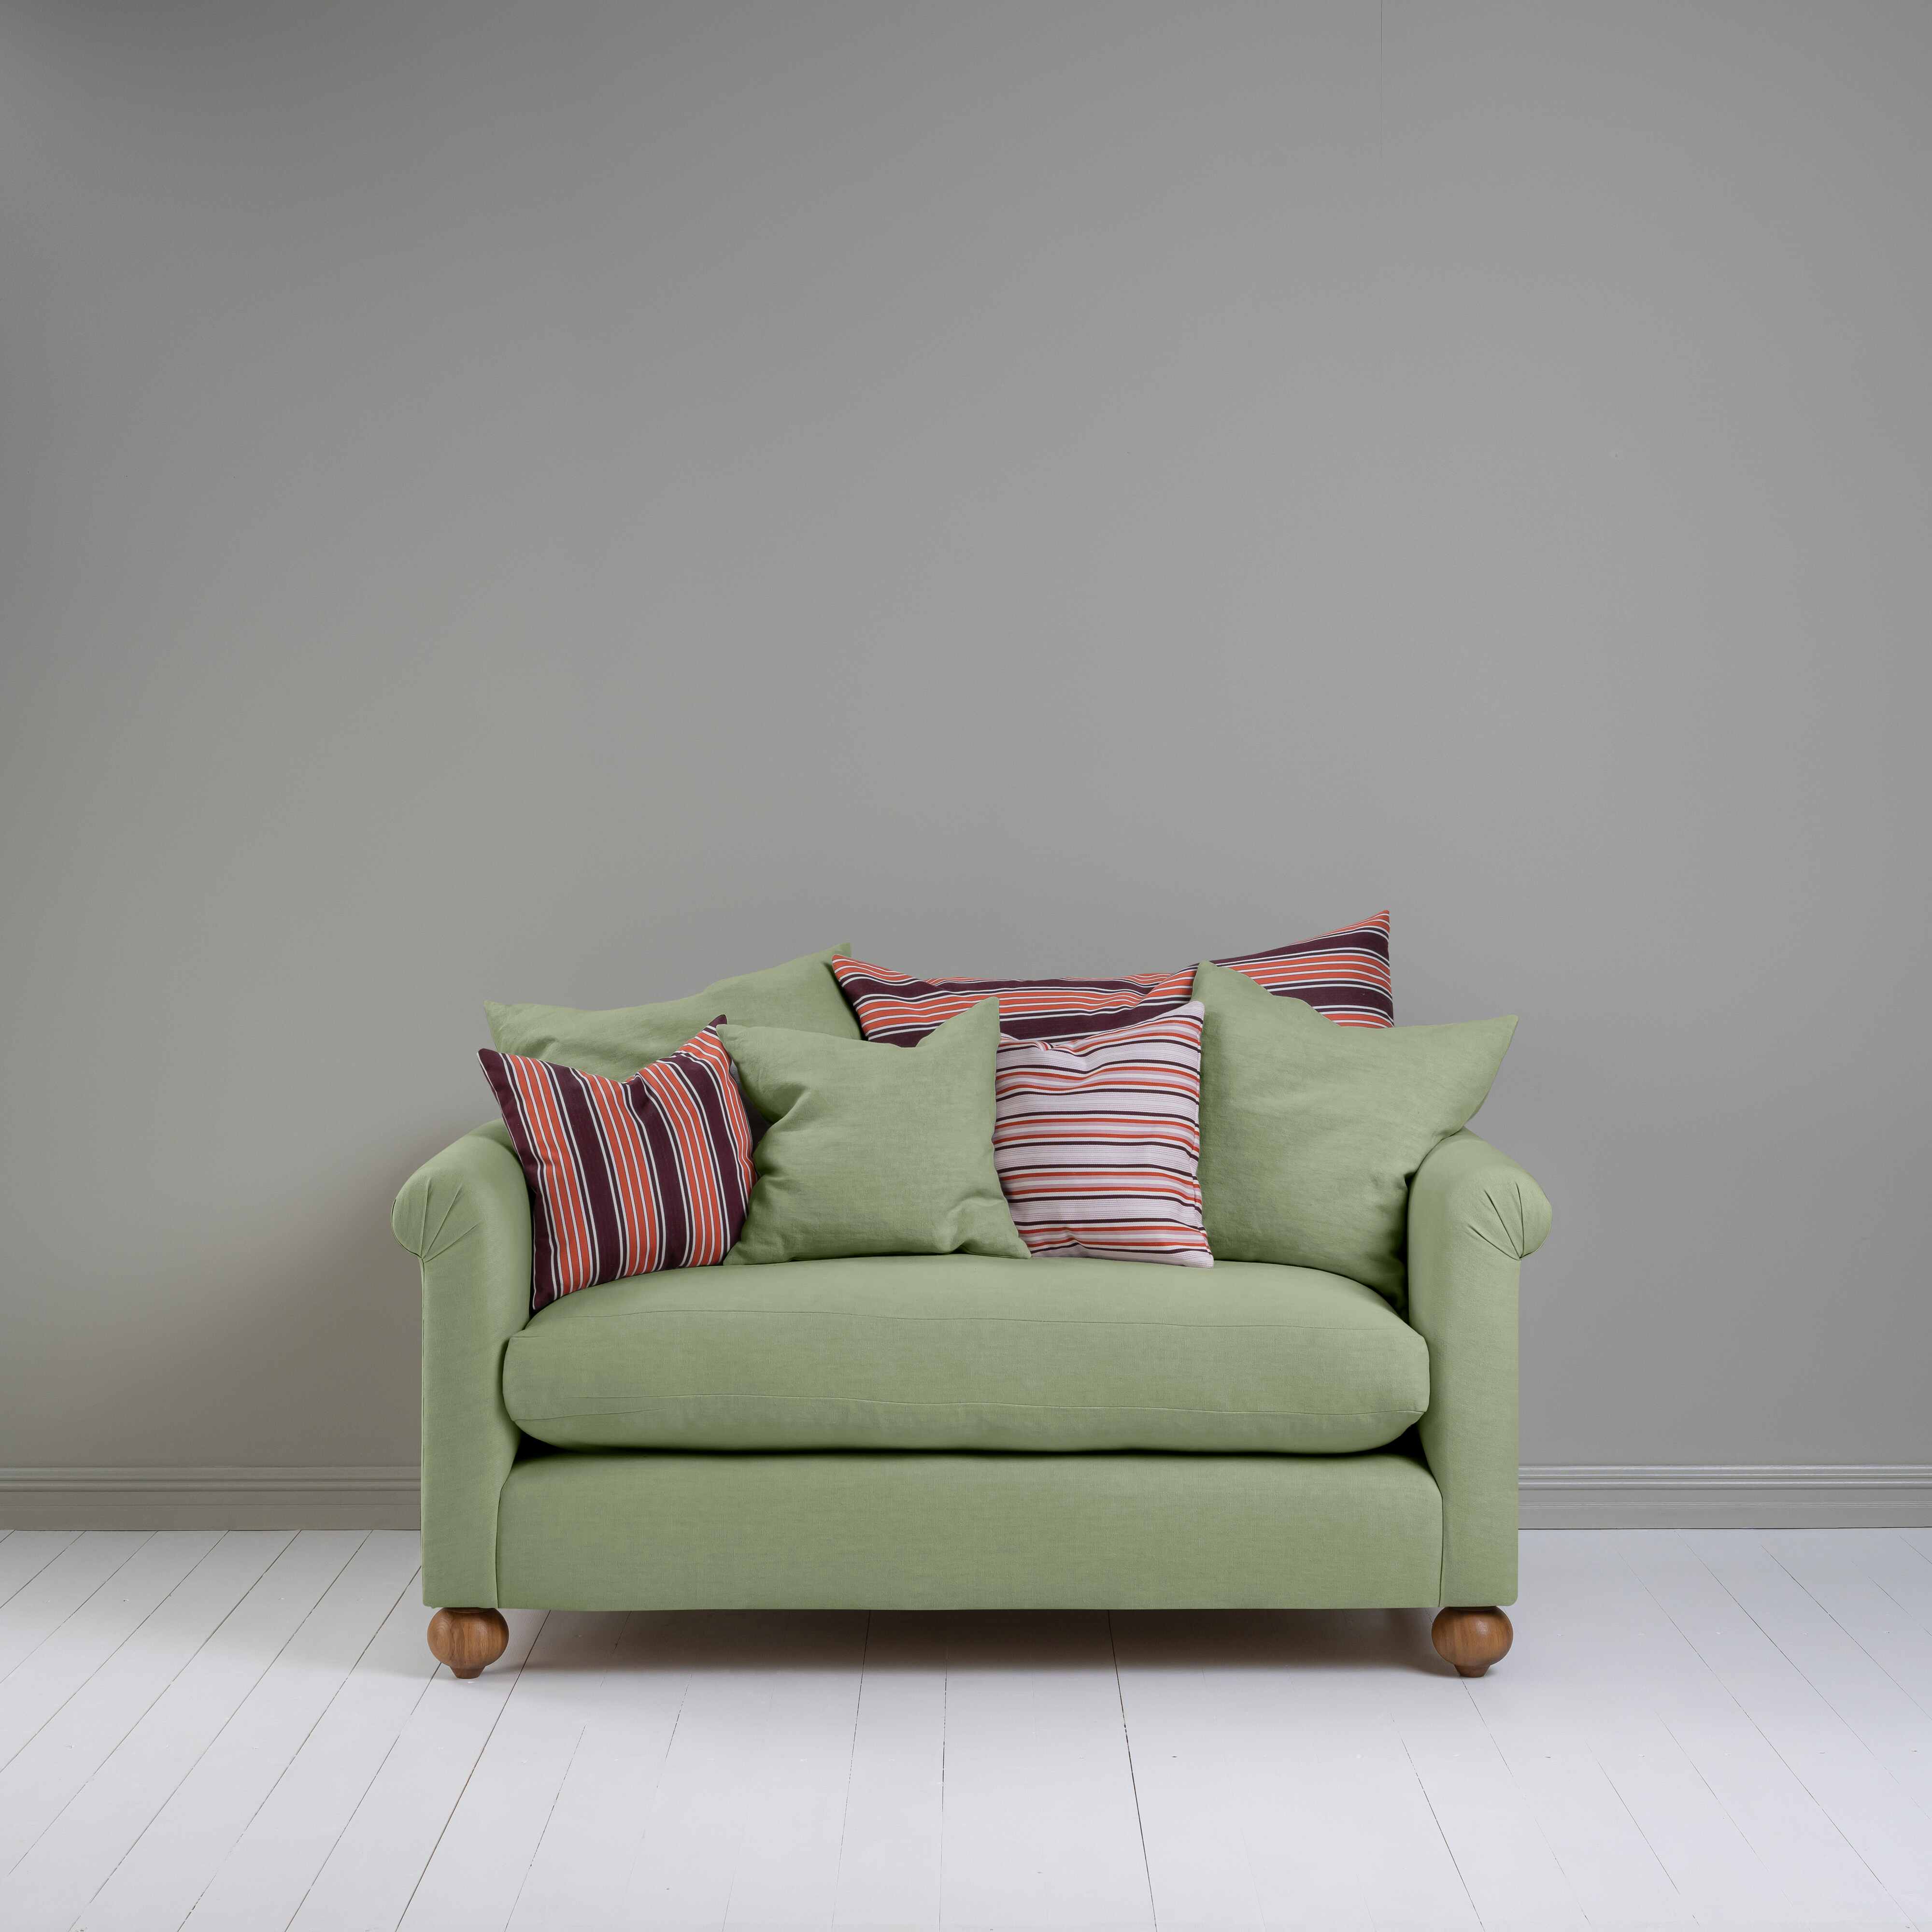  Dolittle 2 Seater Sofa in Laidback Linen Moss 